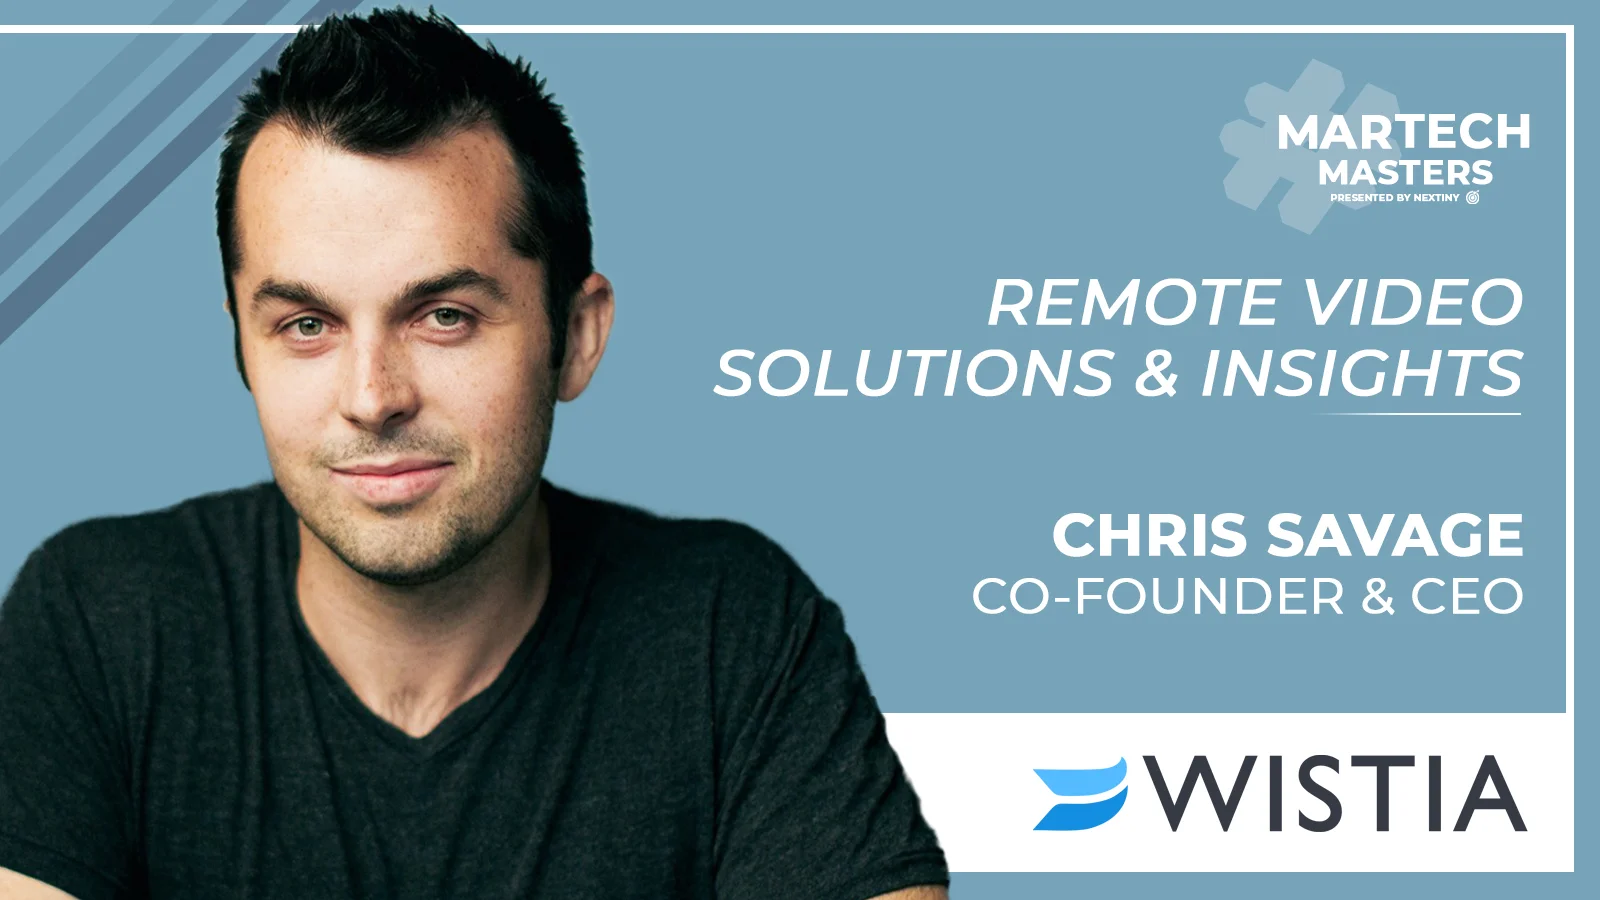 Martech Masters Wistia Video Solutions